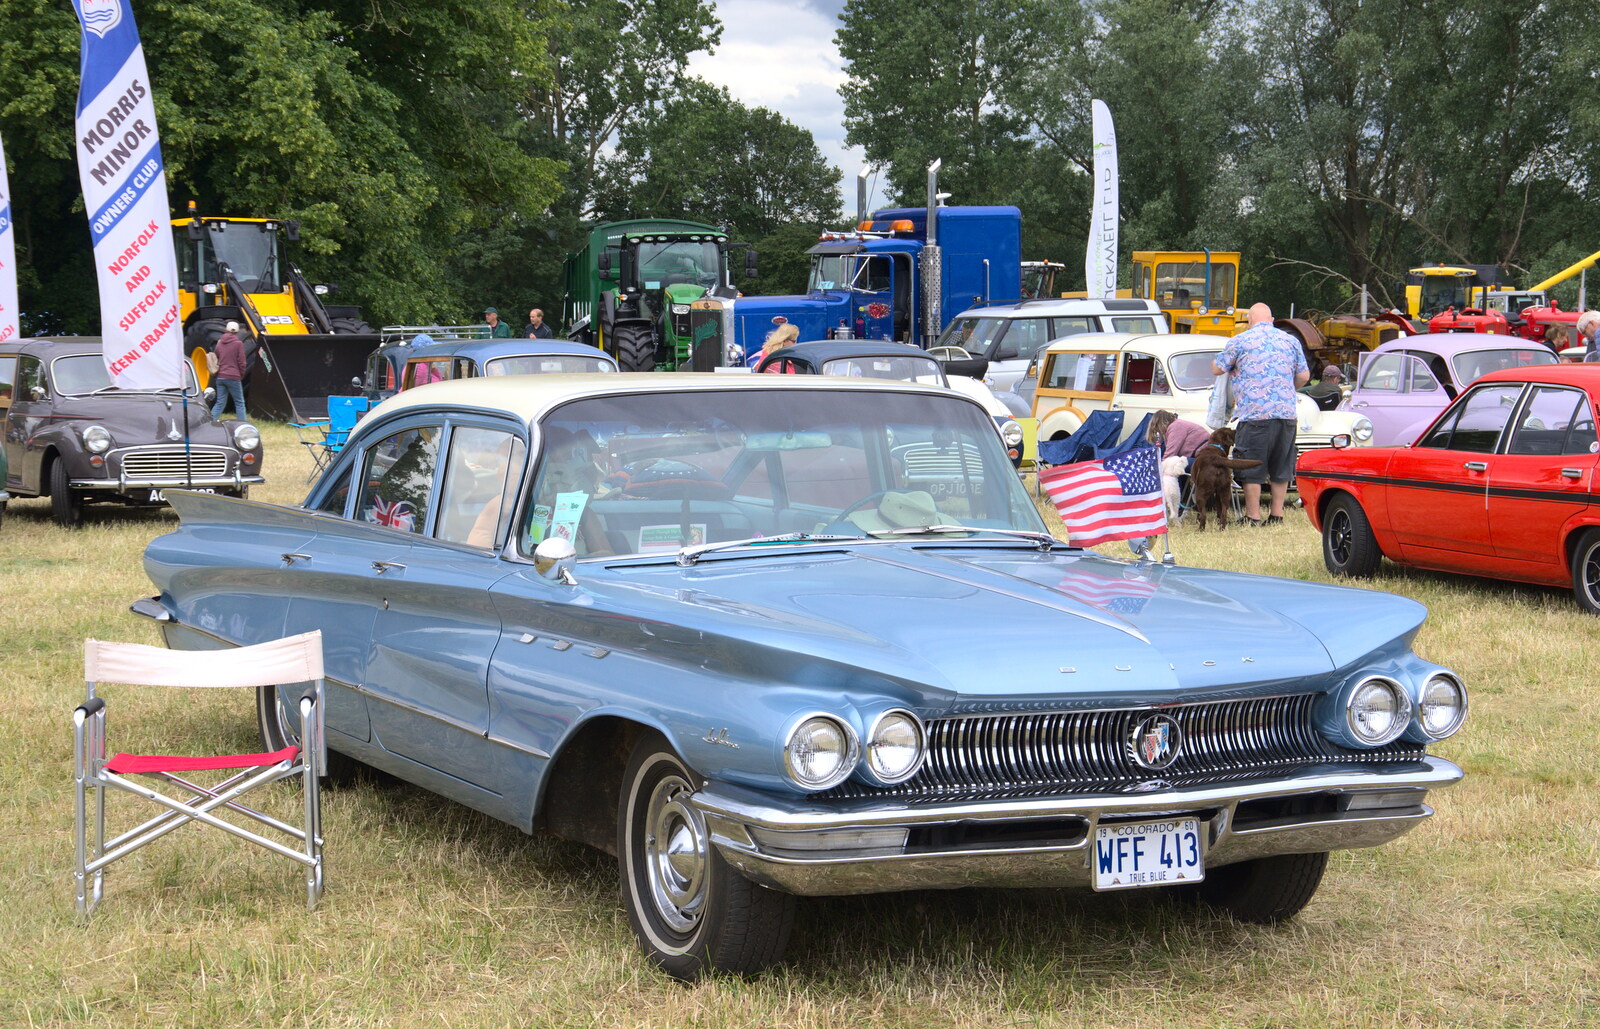 An outrageous 1960s Buick from The Formerly-Known-As-The-Eye-Show, Palgrave, Suffolk - 17th June 2018